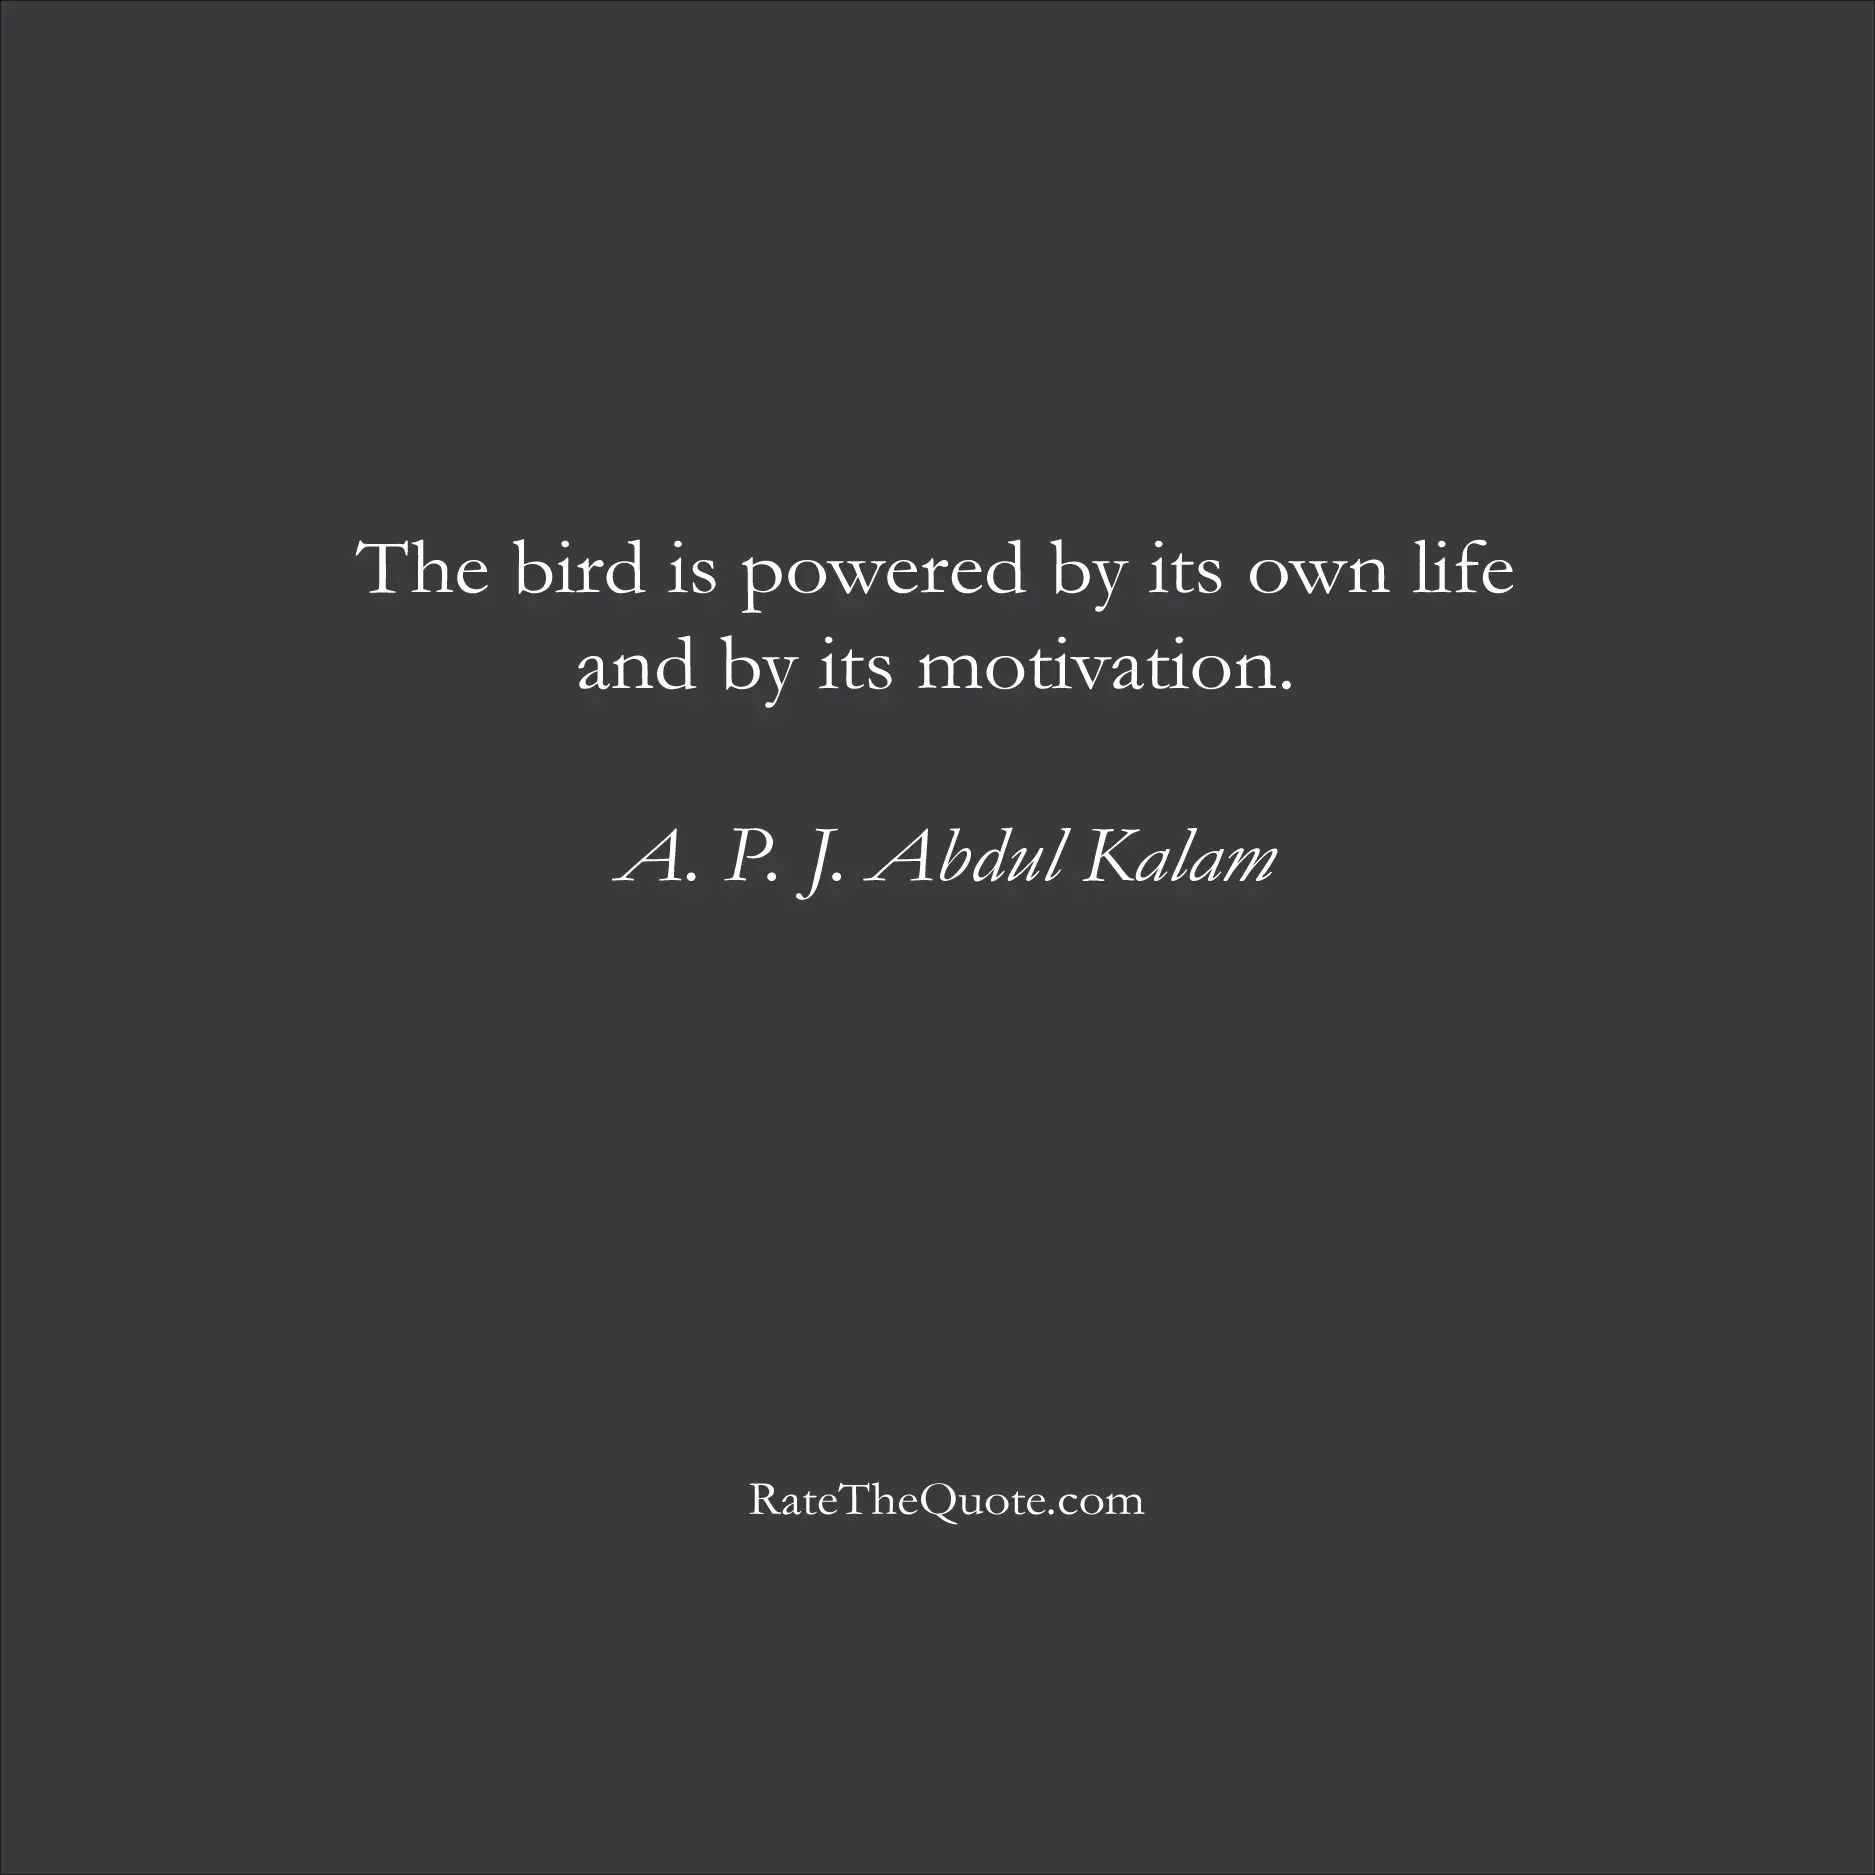 Motivation Quotes The bird is powered by its own life and by its motivation. A. P. J. Abdul Kalam